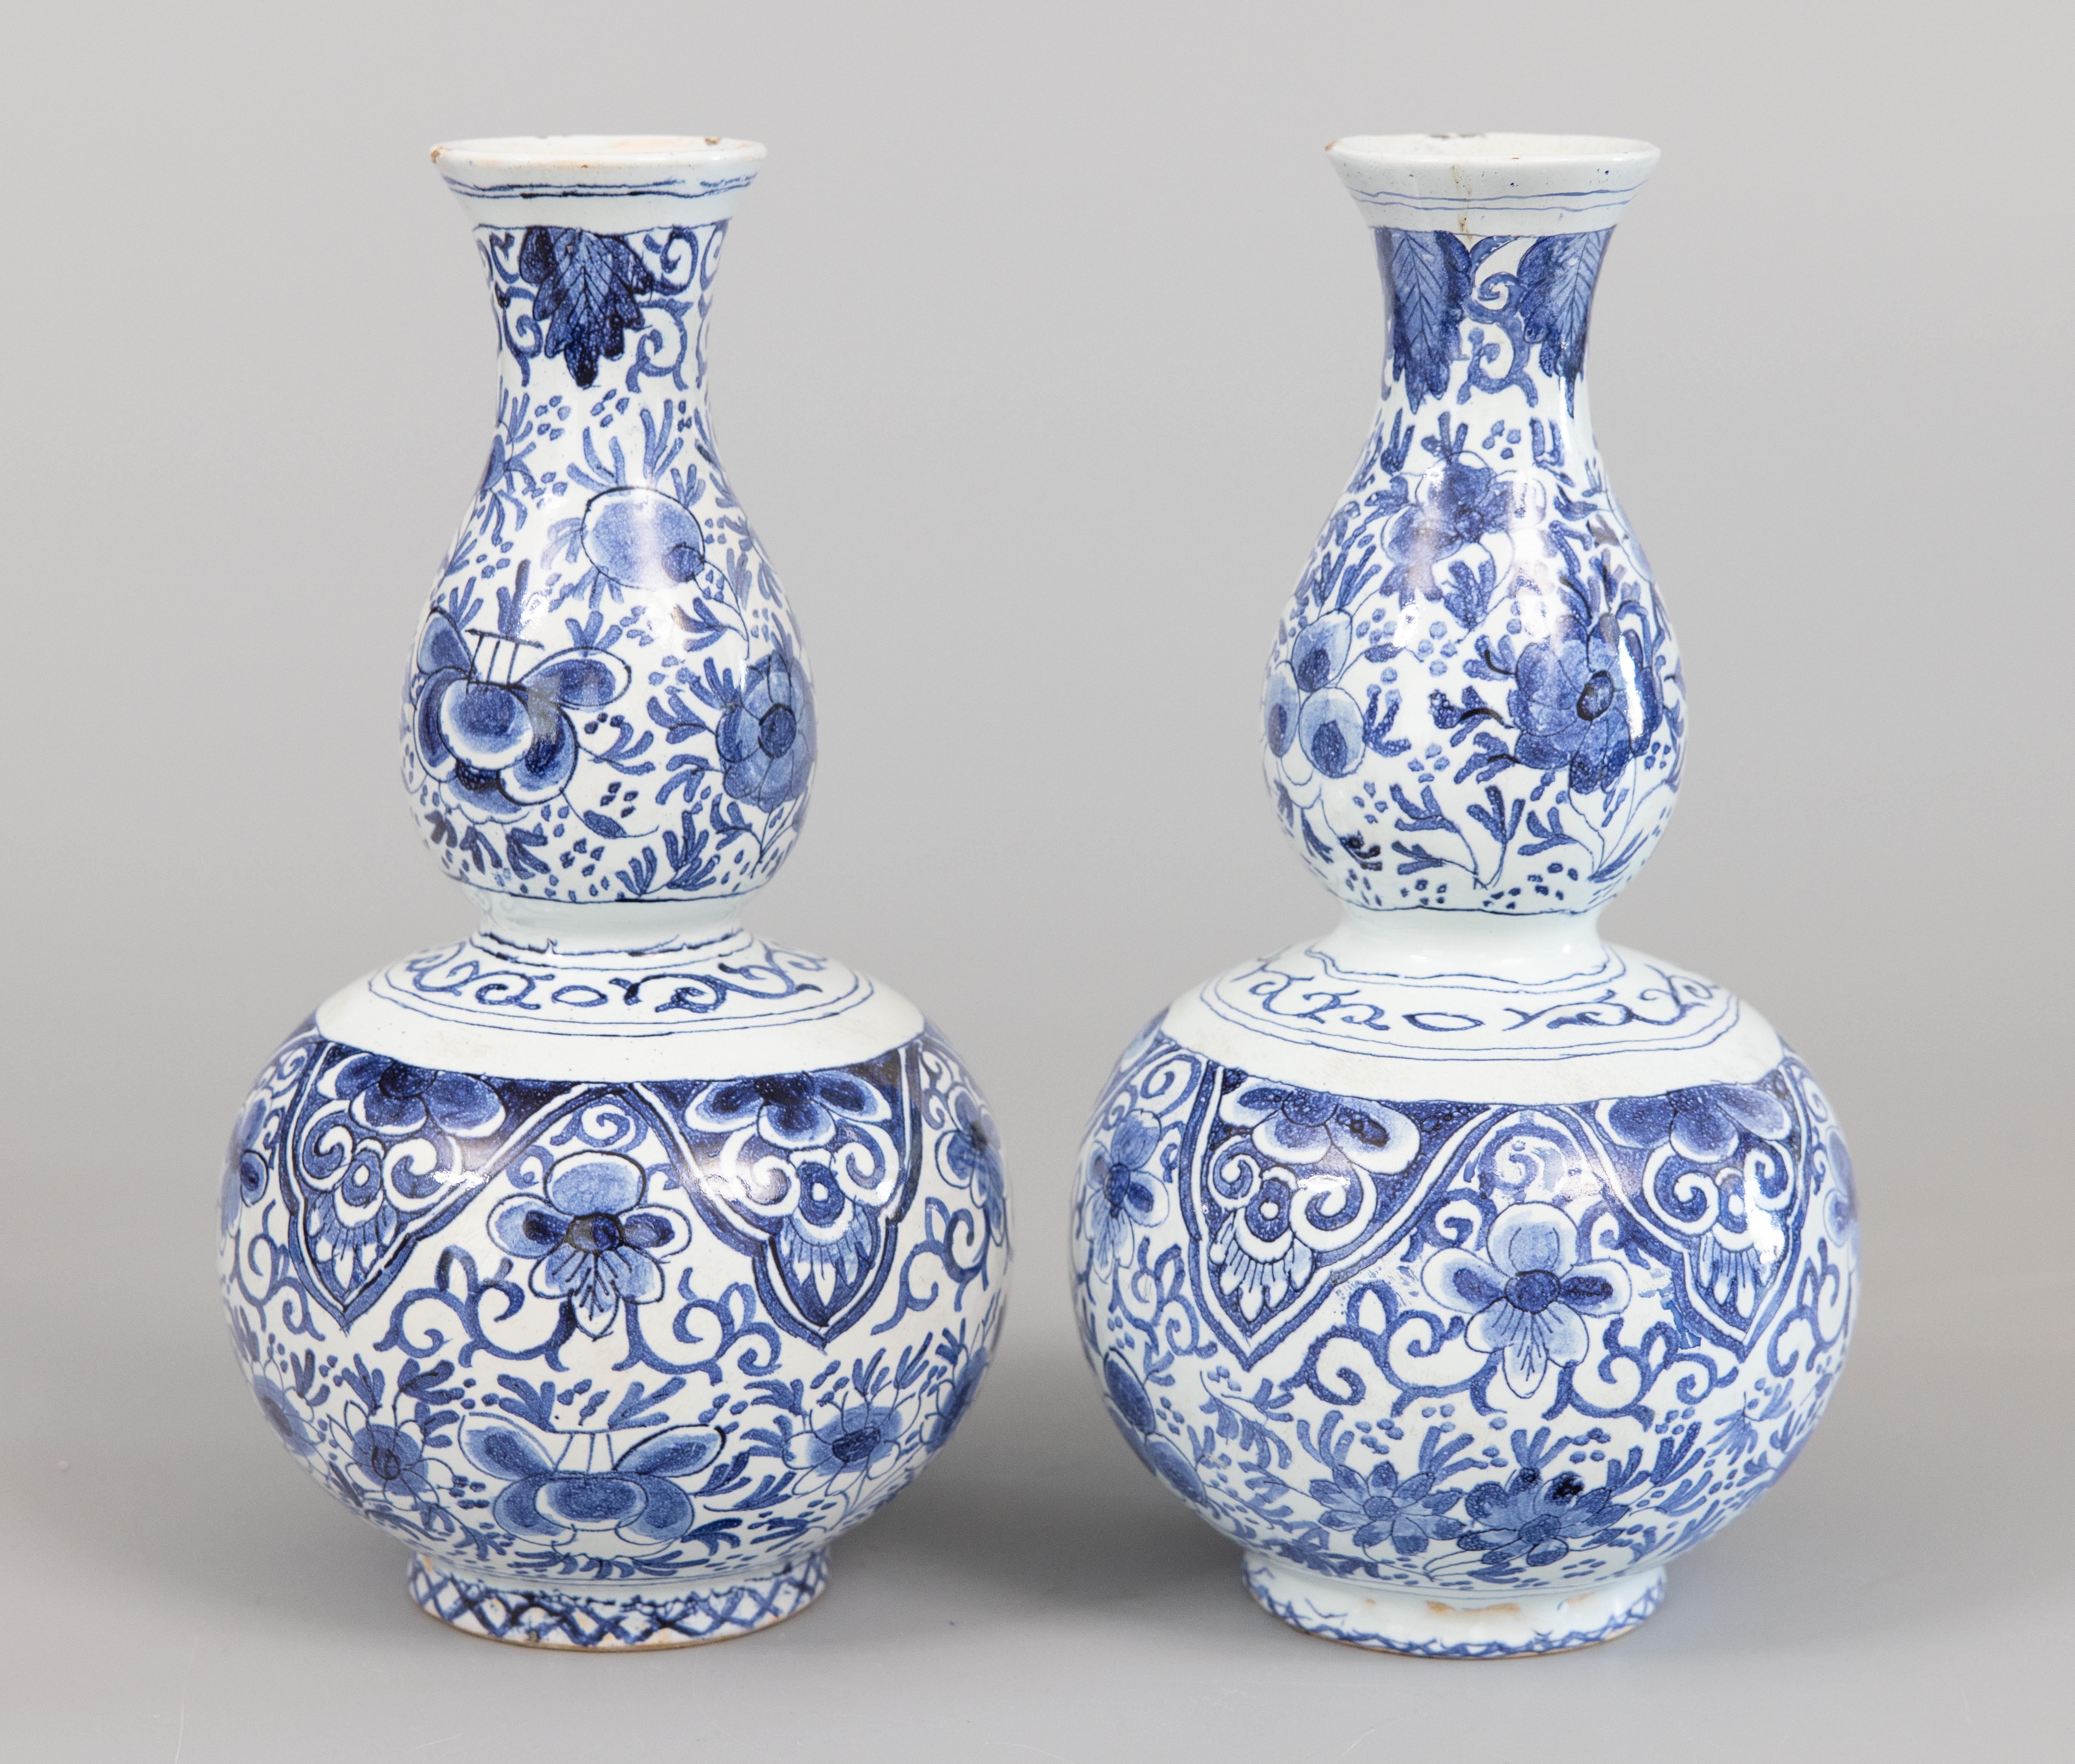 Pair of Antique Dutch Delft Faience Double Gourd Vases, circa 1800 In Good Condition For Sale In Pearland, TX